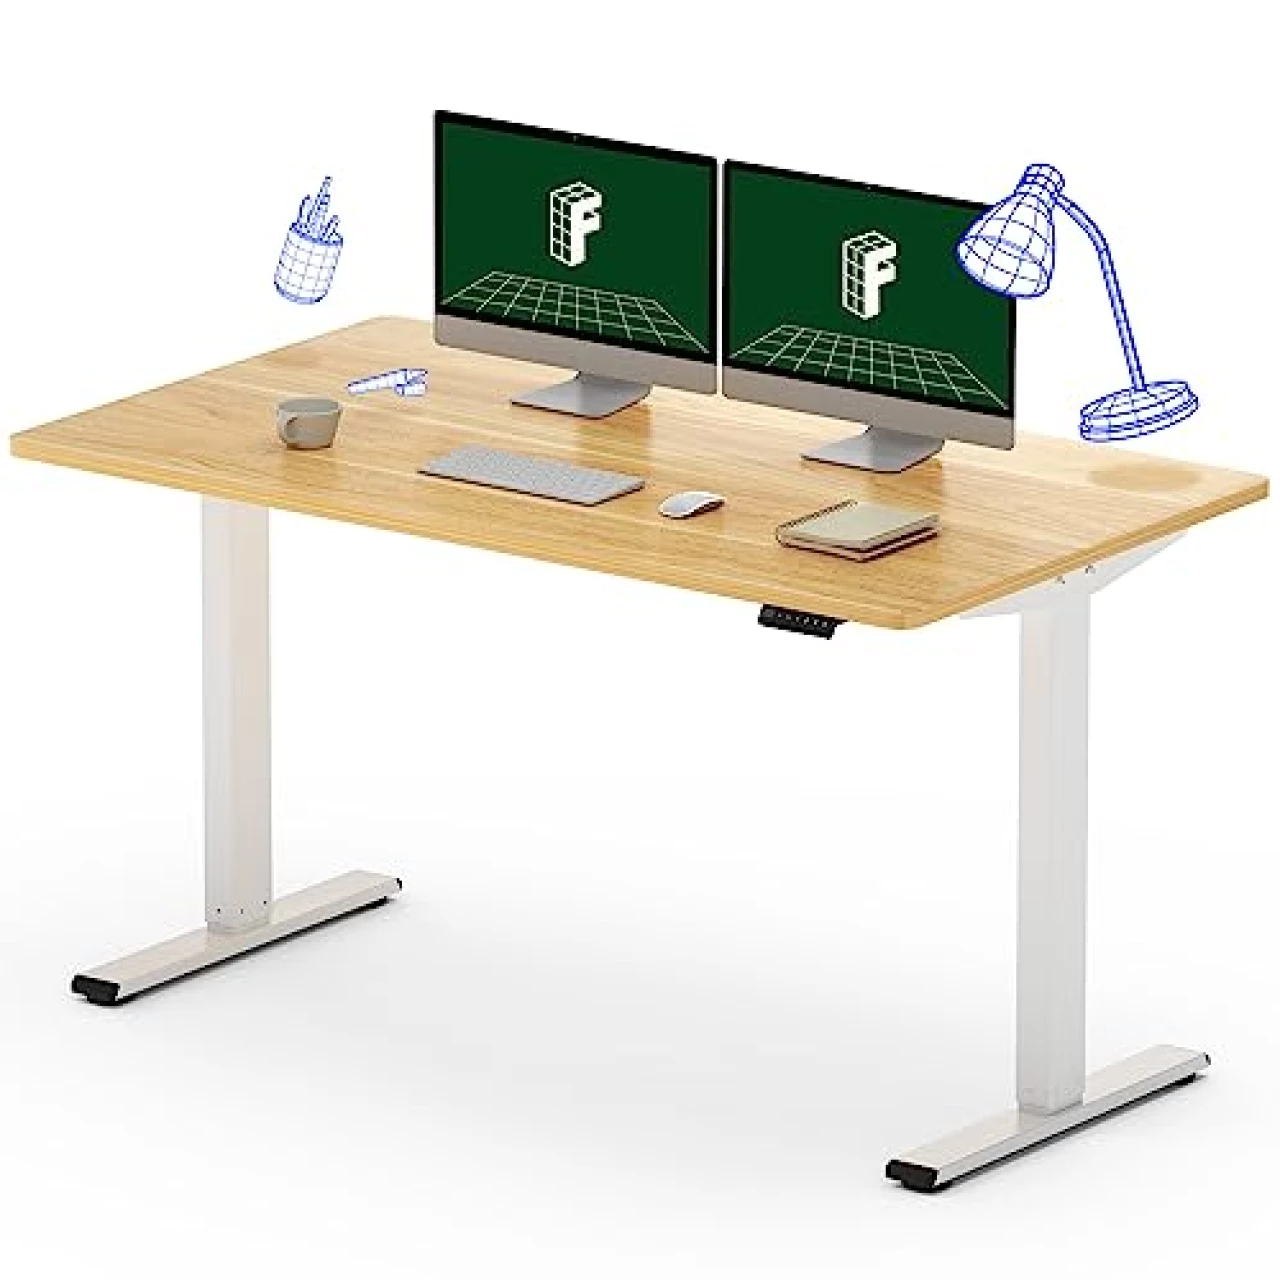 FLEXISPOT EN1 Electric Height Adjustable Desk 55 x 28 Inches Whole-Piece Desk Ergonomic Memory Controller Standing Desk Stand Up Desk Workstation (White Frame + 55inch Maple Top, 2 Packages)